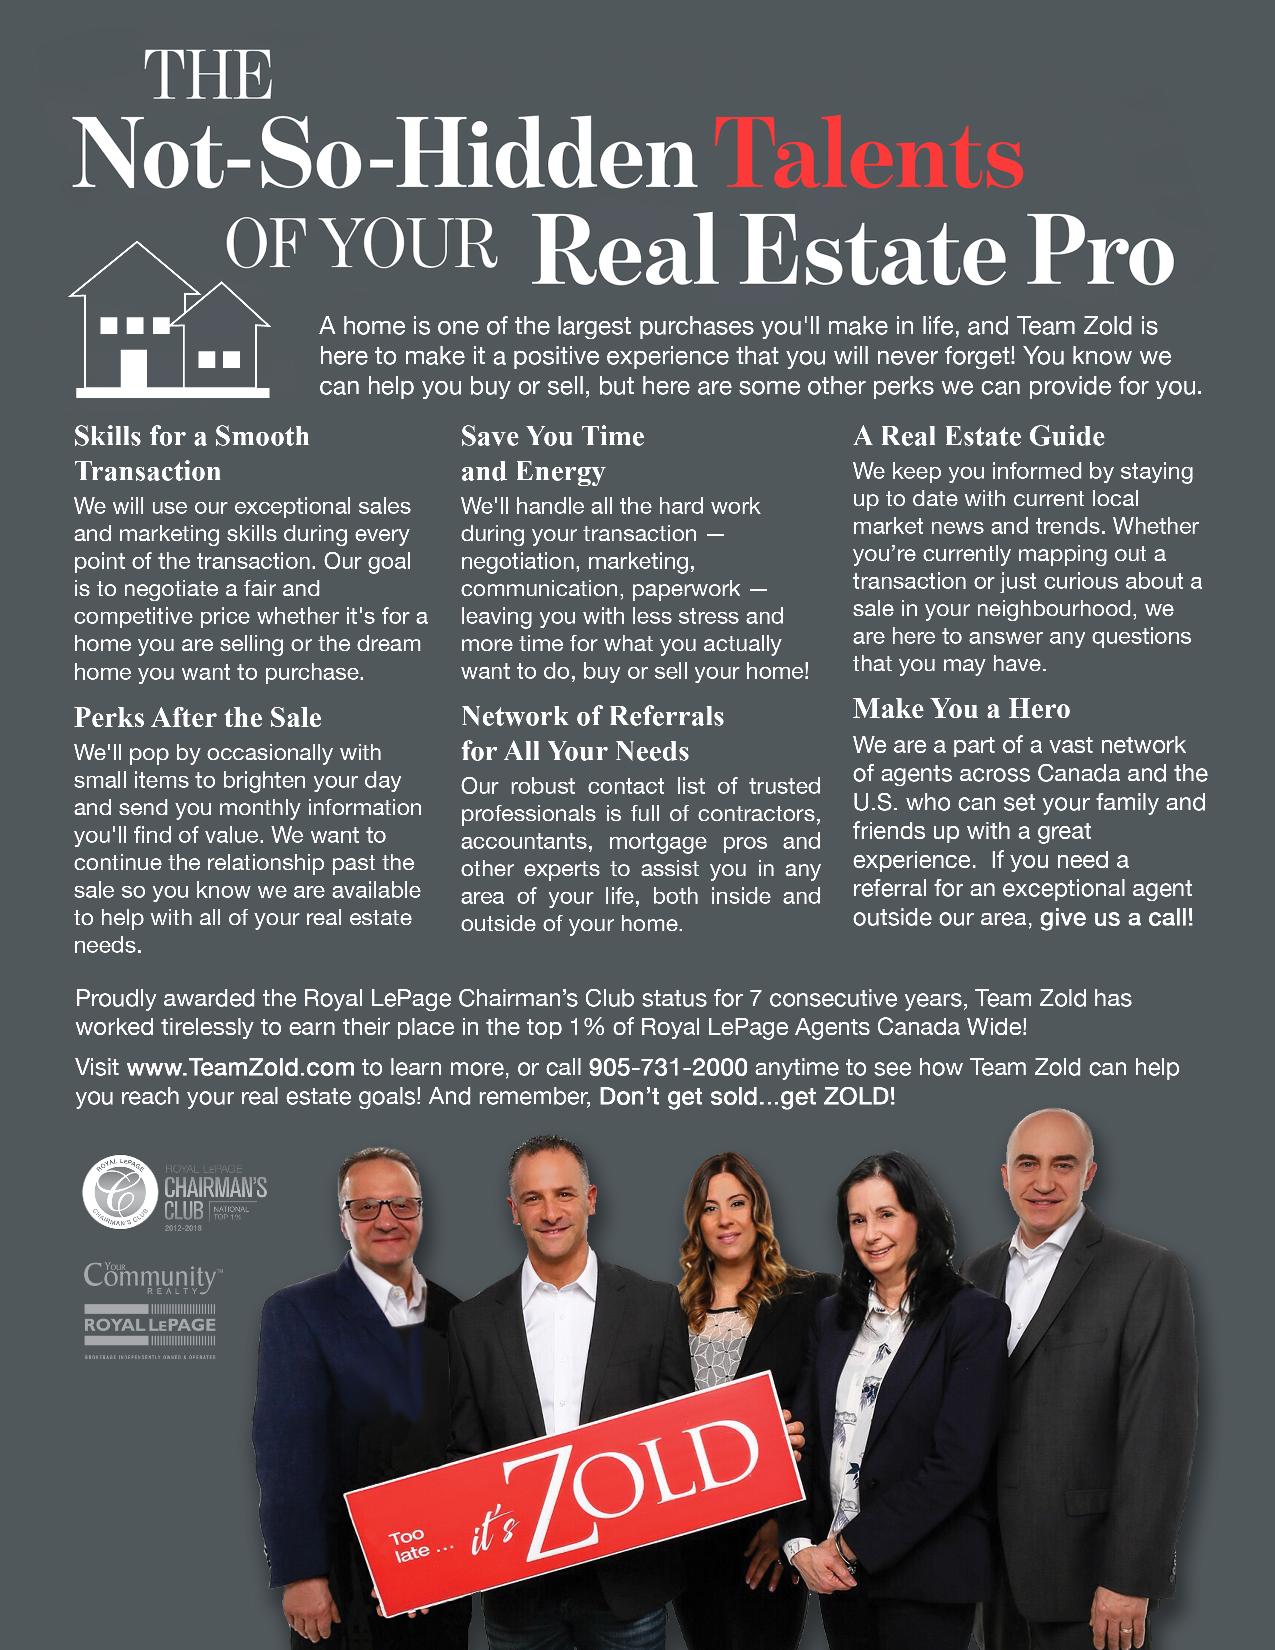 The Not-So-Hidden Talents of Your Real Estate Pro page 2